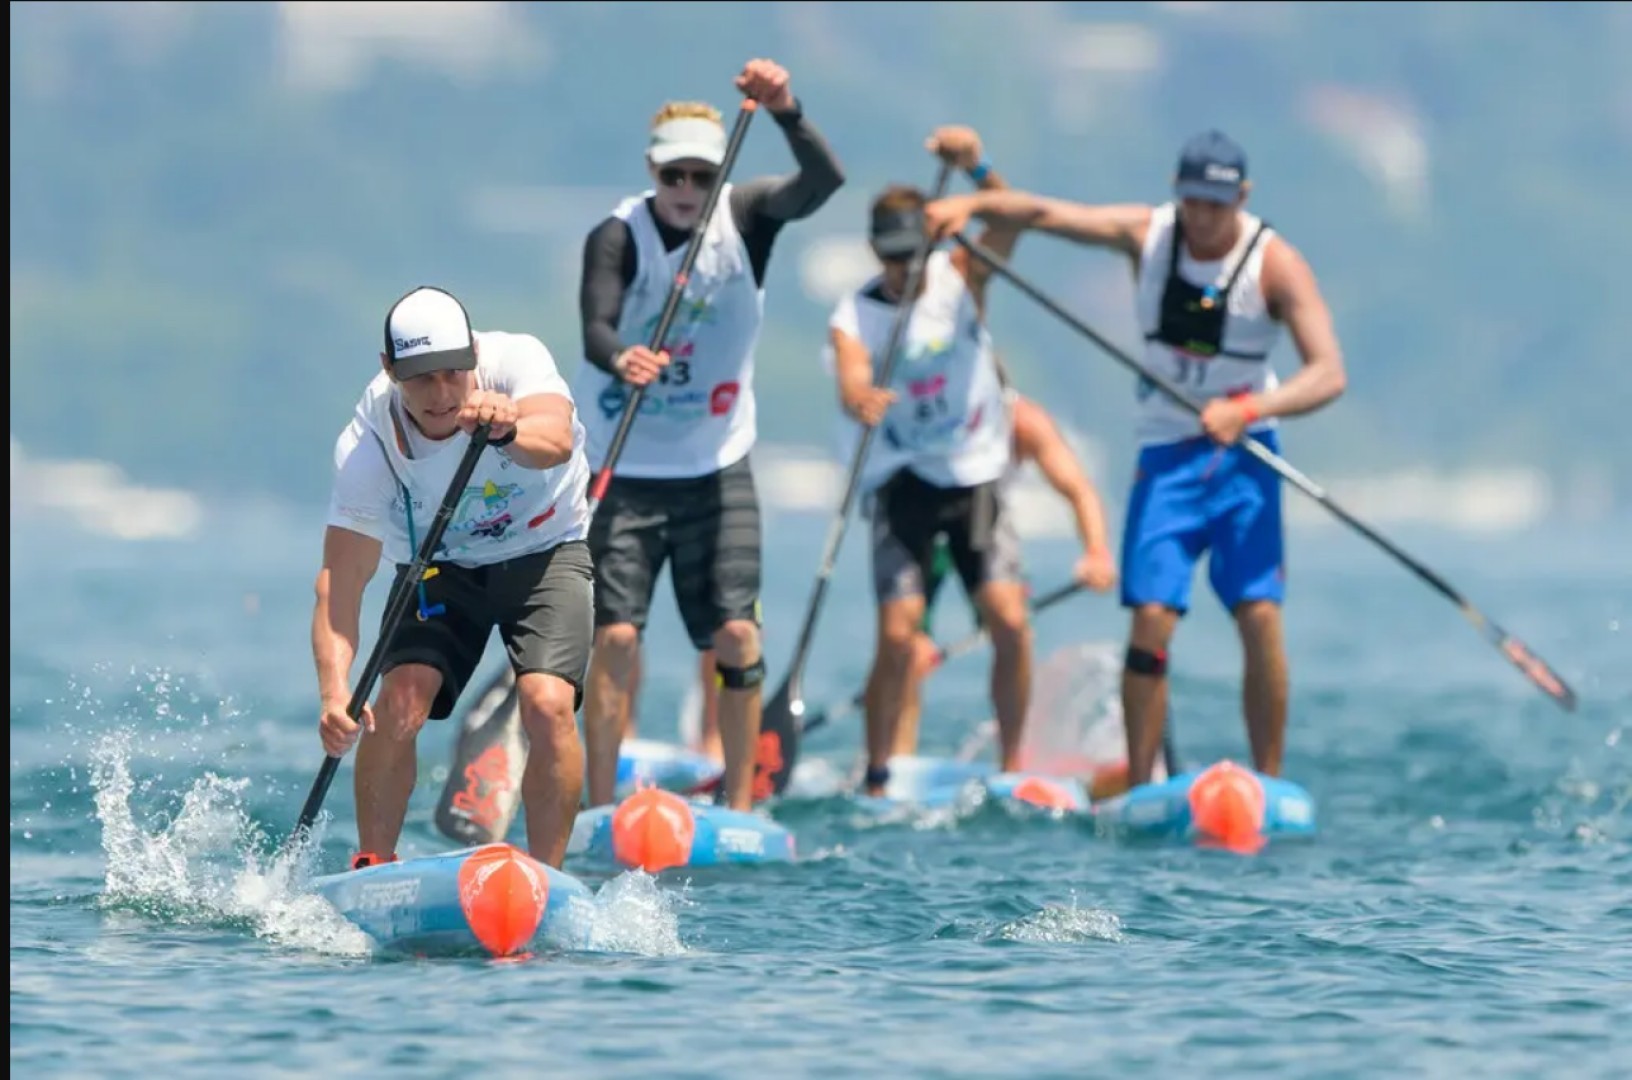 Calasetta Water Sports Festival: Registration for the competition is now open